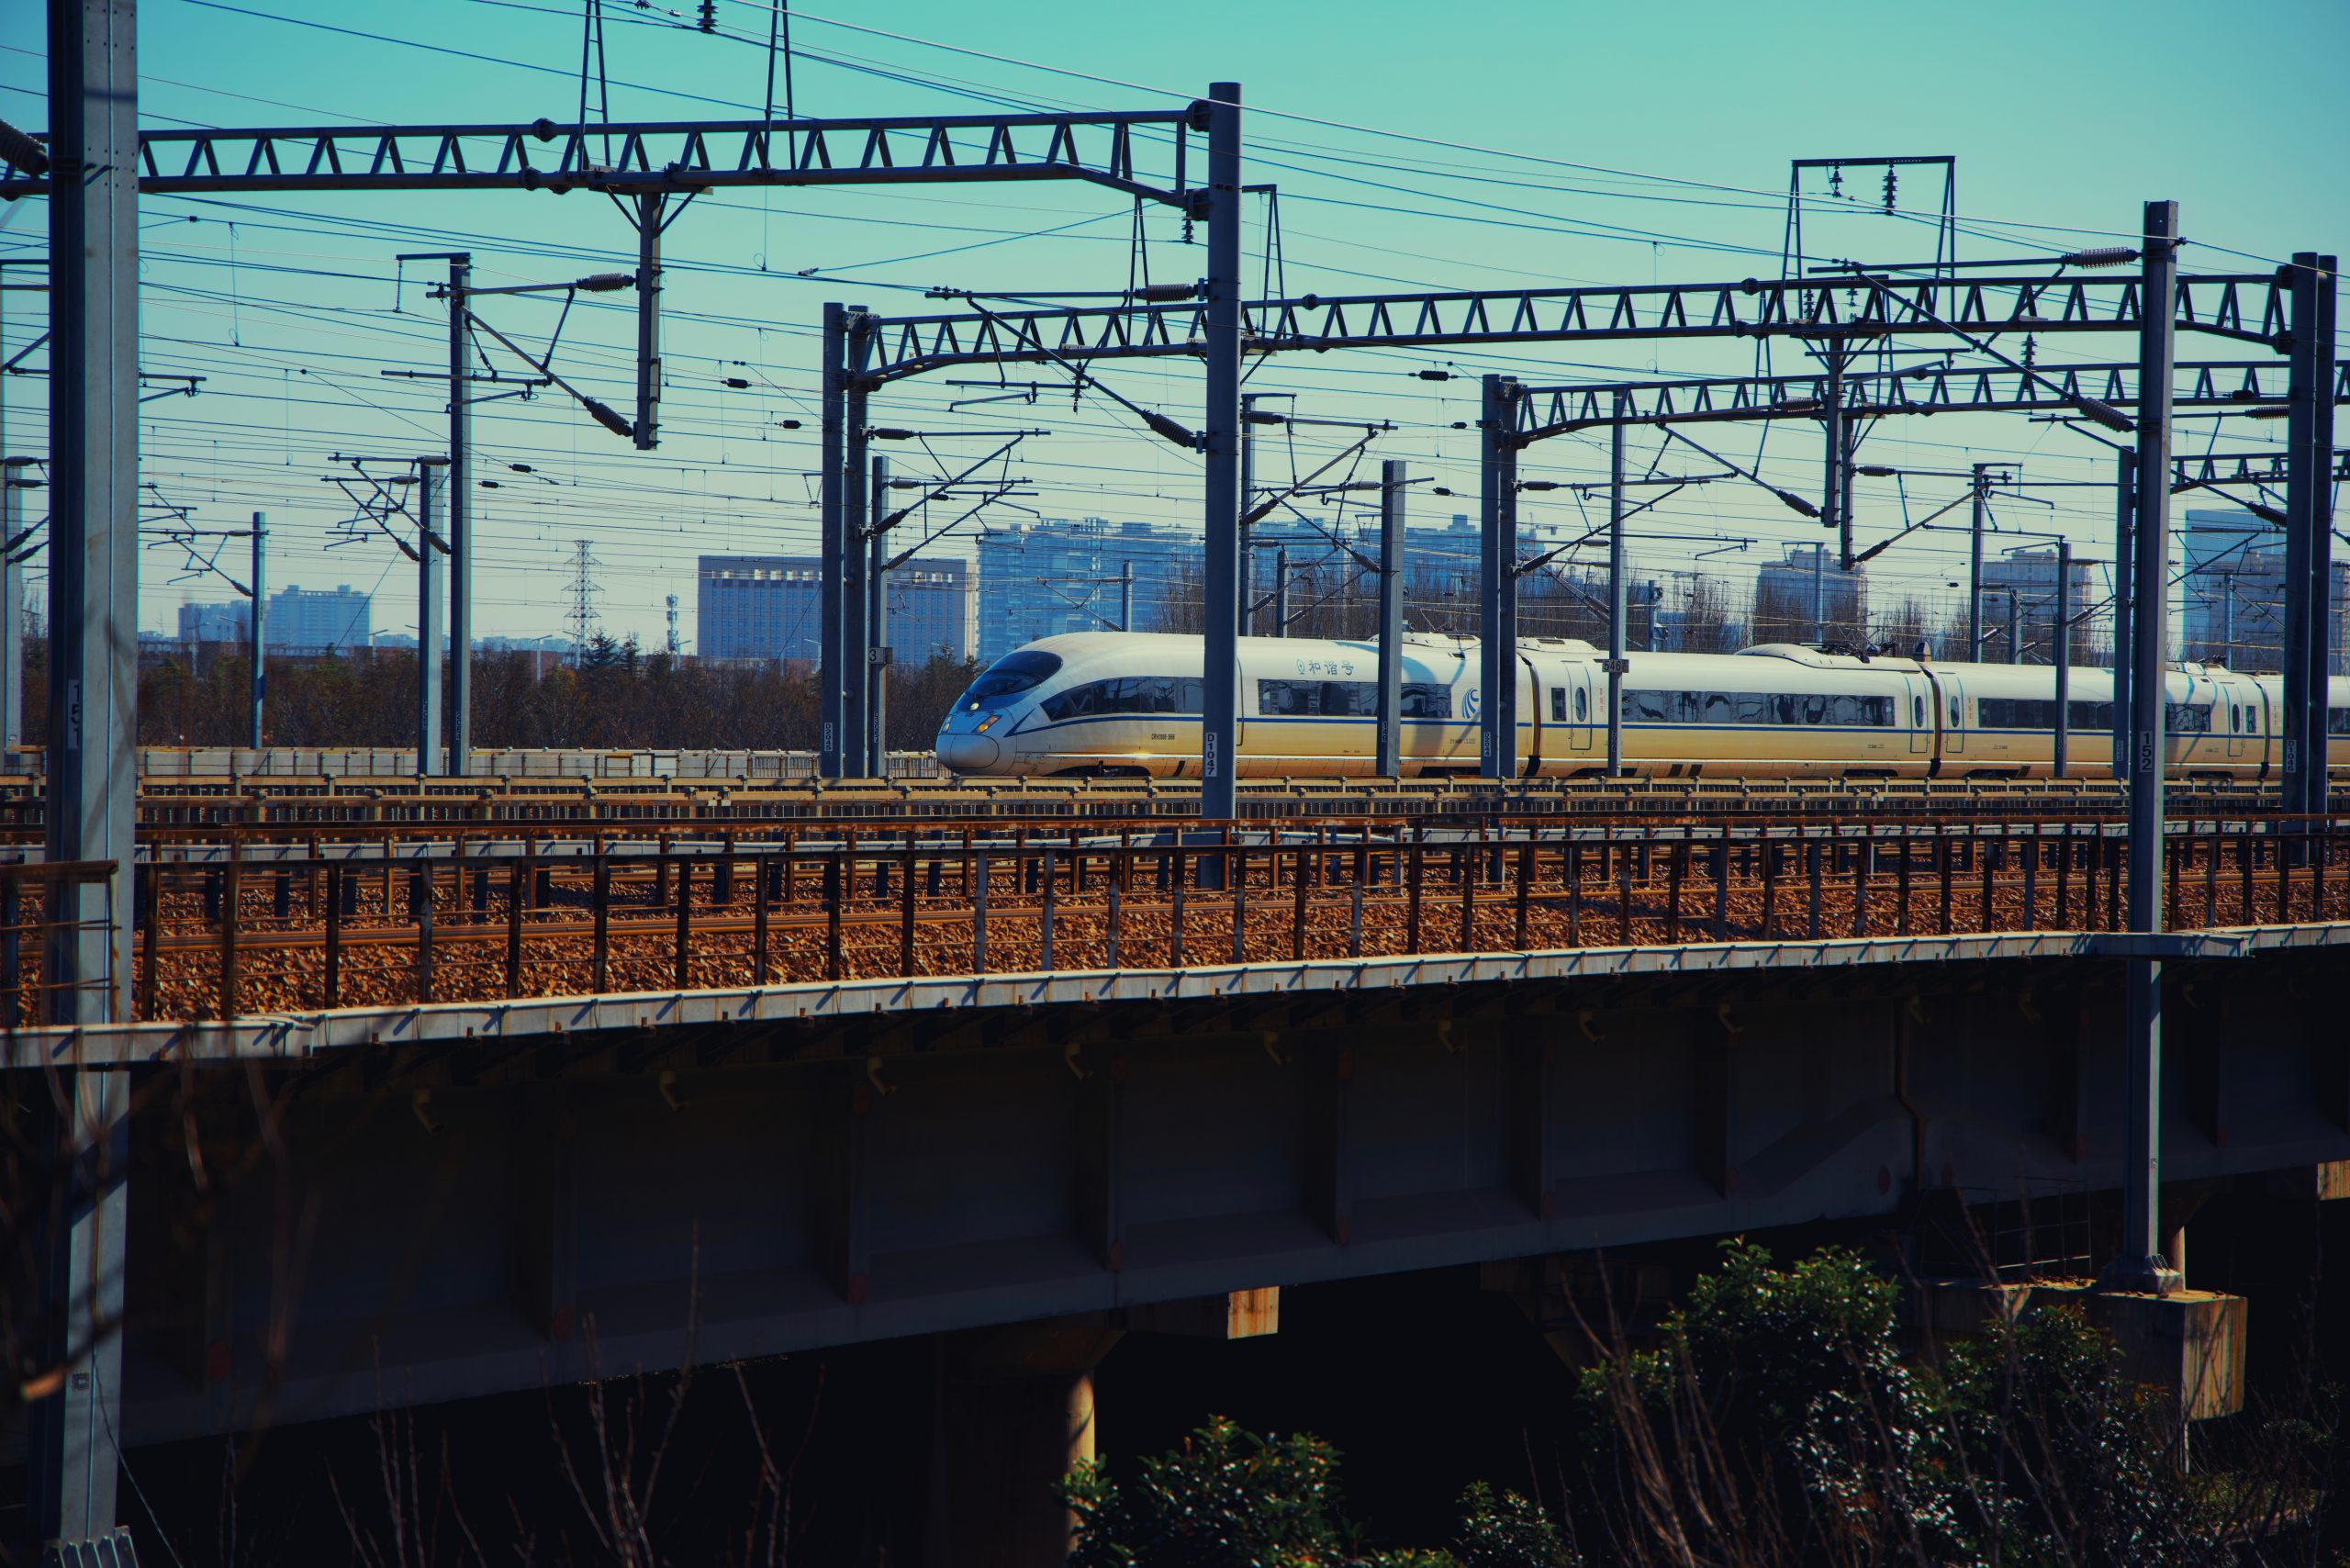 The feasibility of connecting Macao to the high-speed rail network is being studied